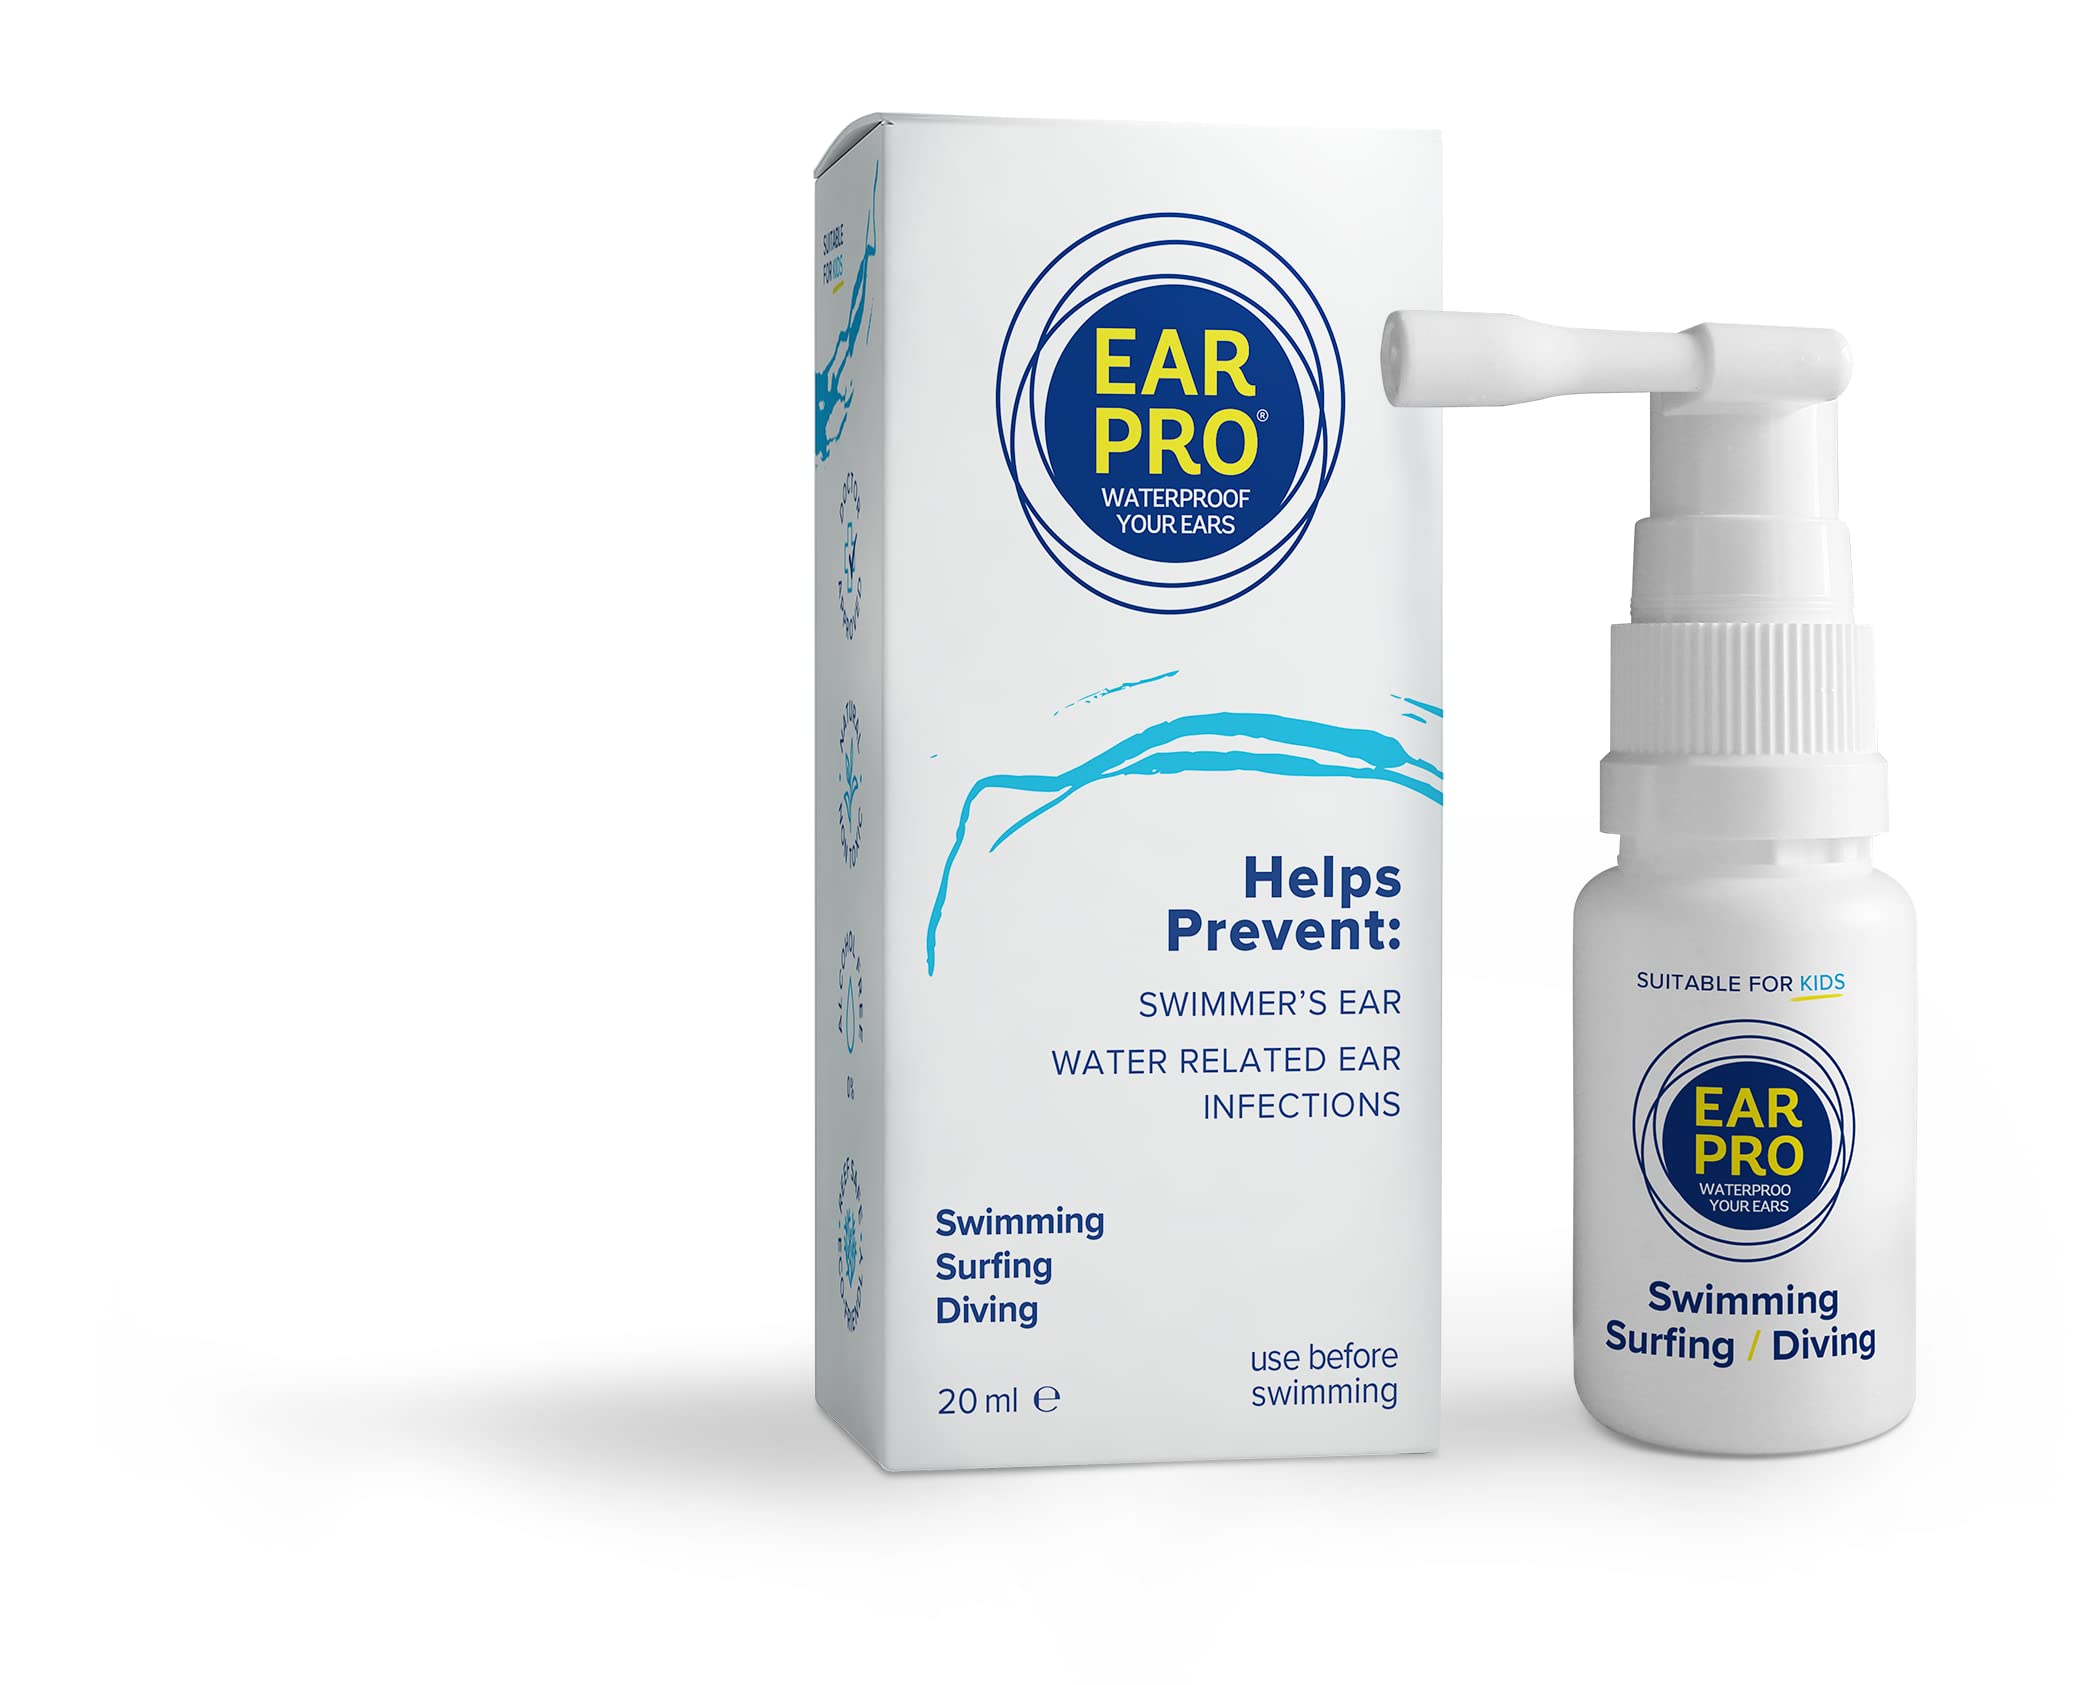 EARPRO - WATERPROOF  Ear Pro All Natural Swimmer Ear Spray for Kids and Adults - Safe and Easy to Use Ear Protection Spray Helps Prevent Trapped Wate